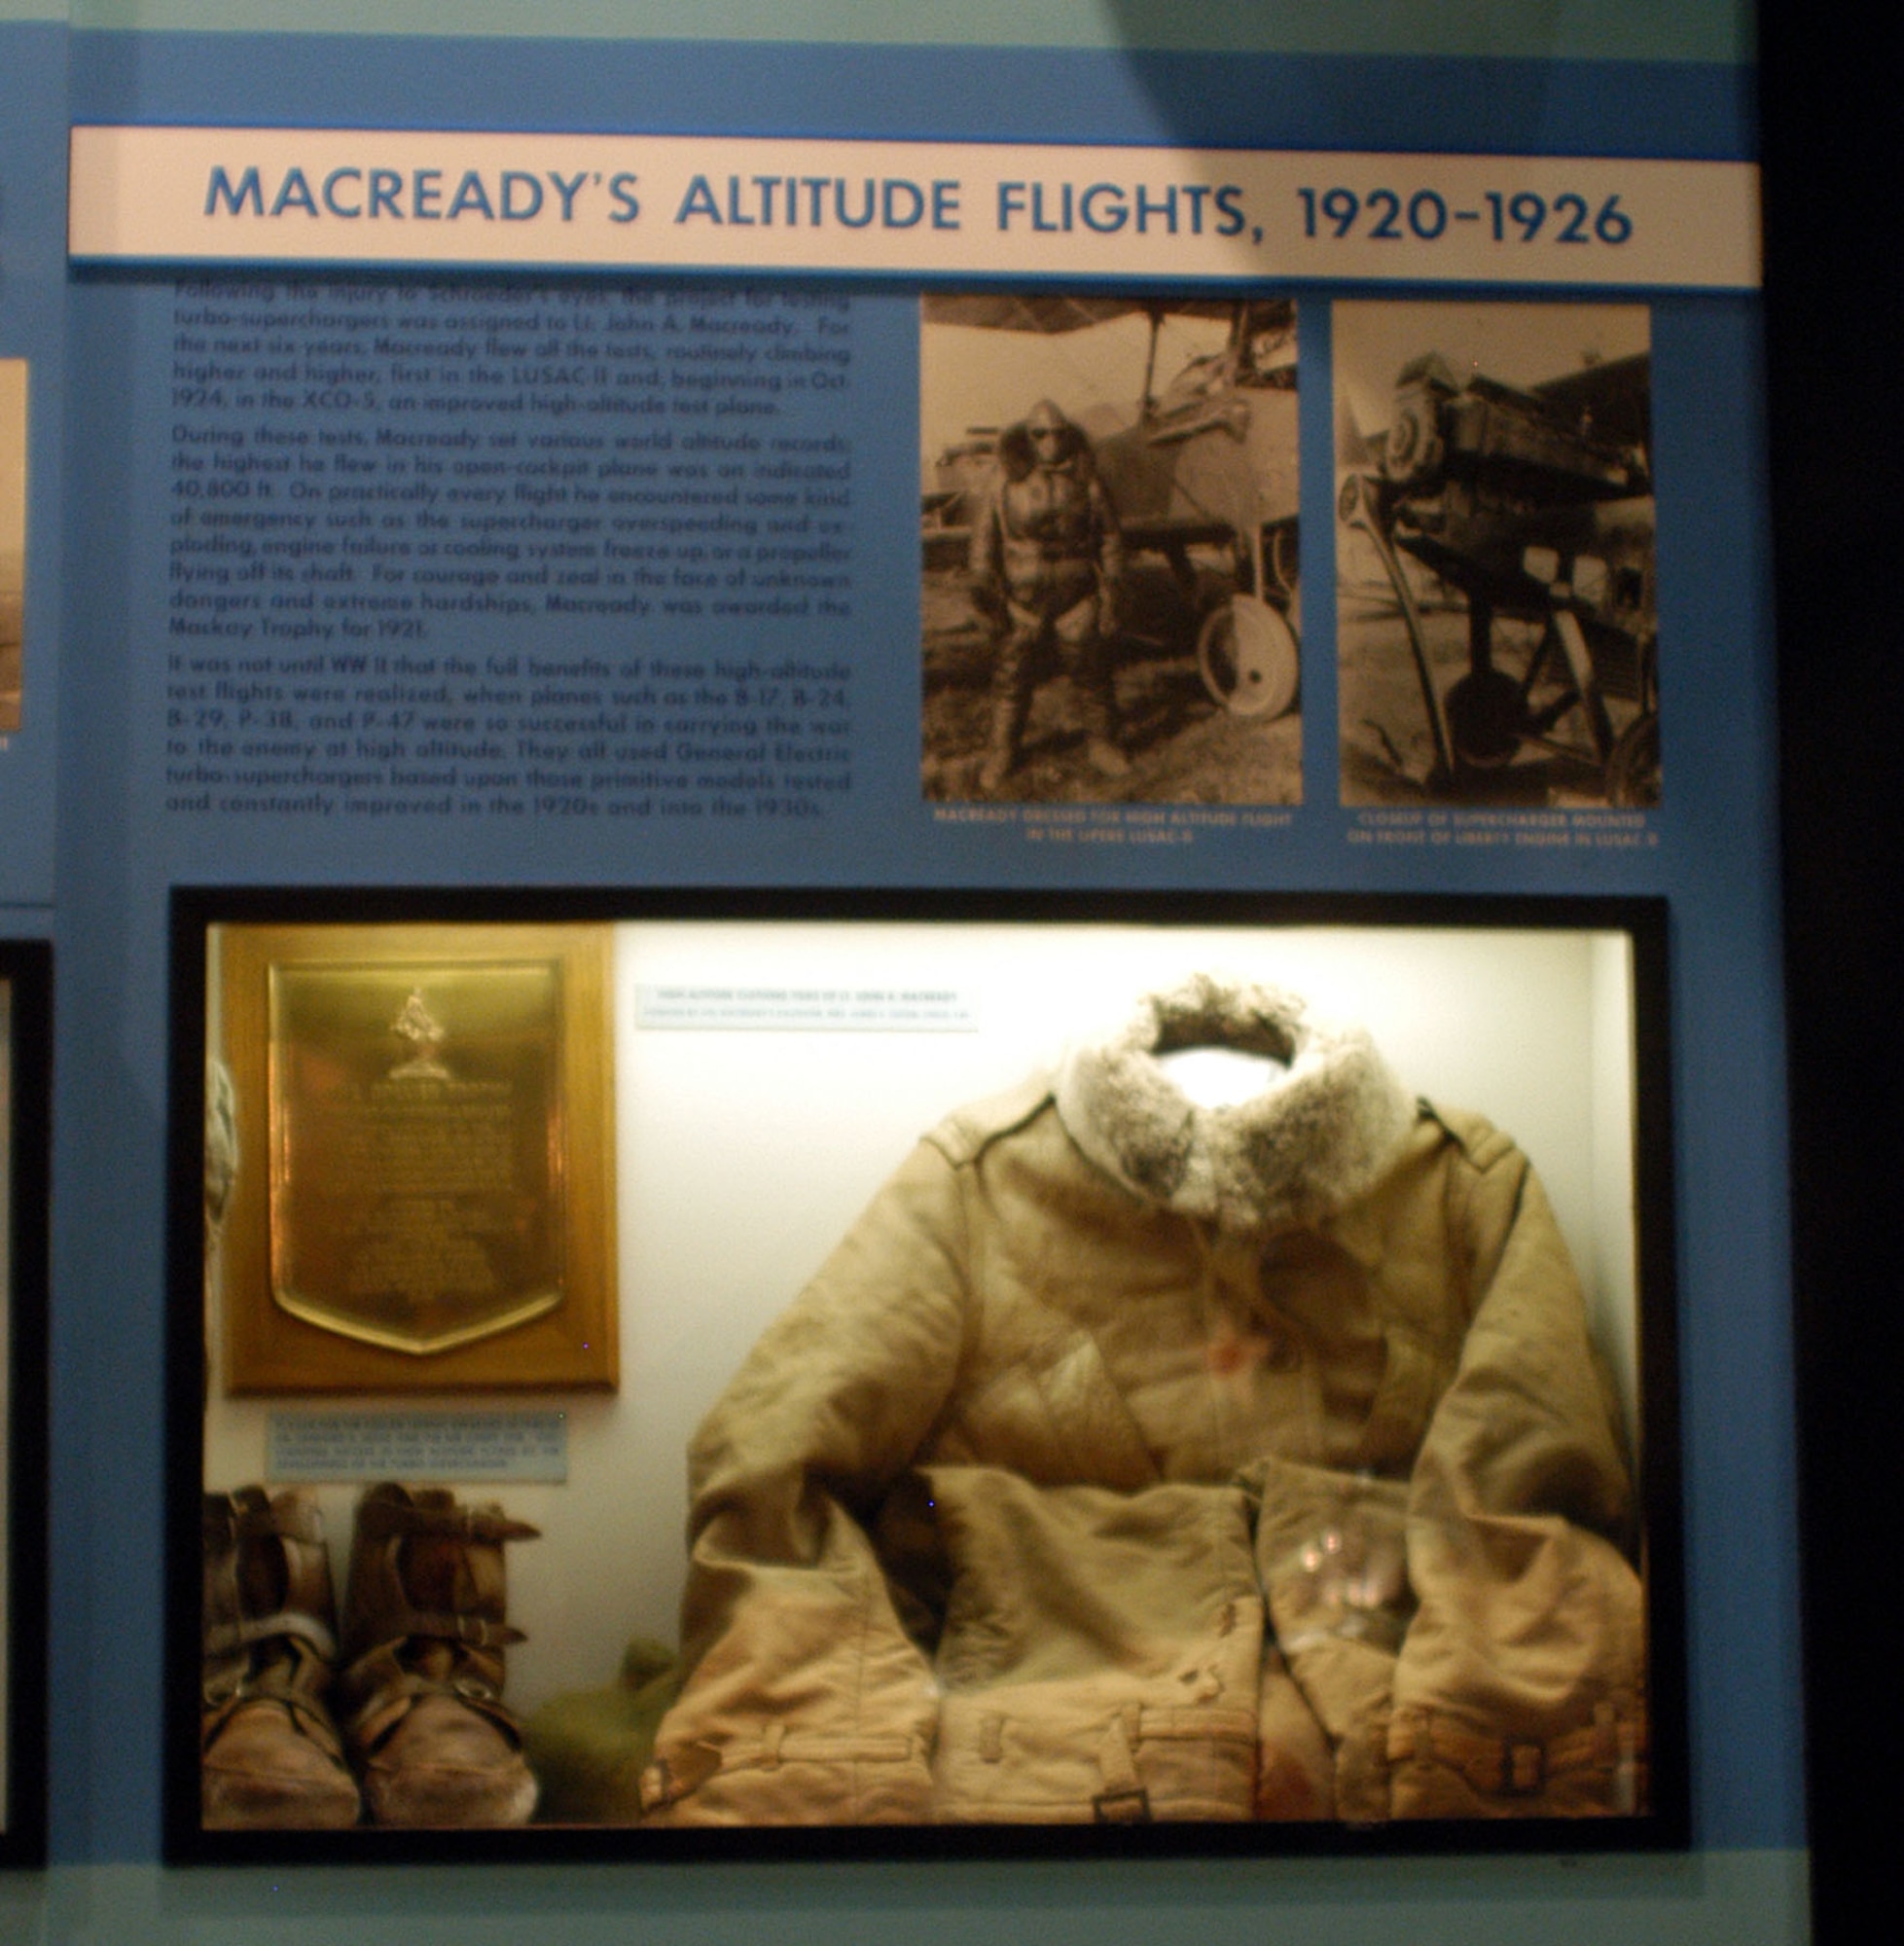 DAYTON, Ohio -- Lt. John A. Macready's Altitude Flights exhibit at the National Museum of the United States Air Force. (U.S. Air Force photo)